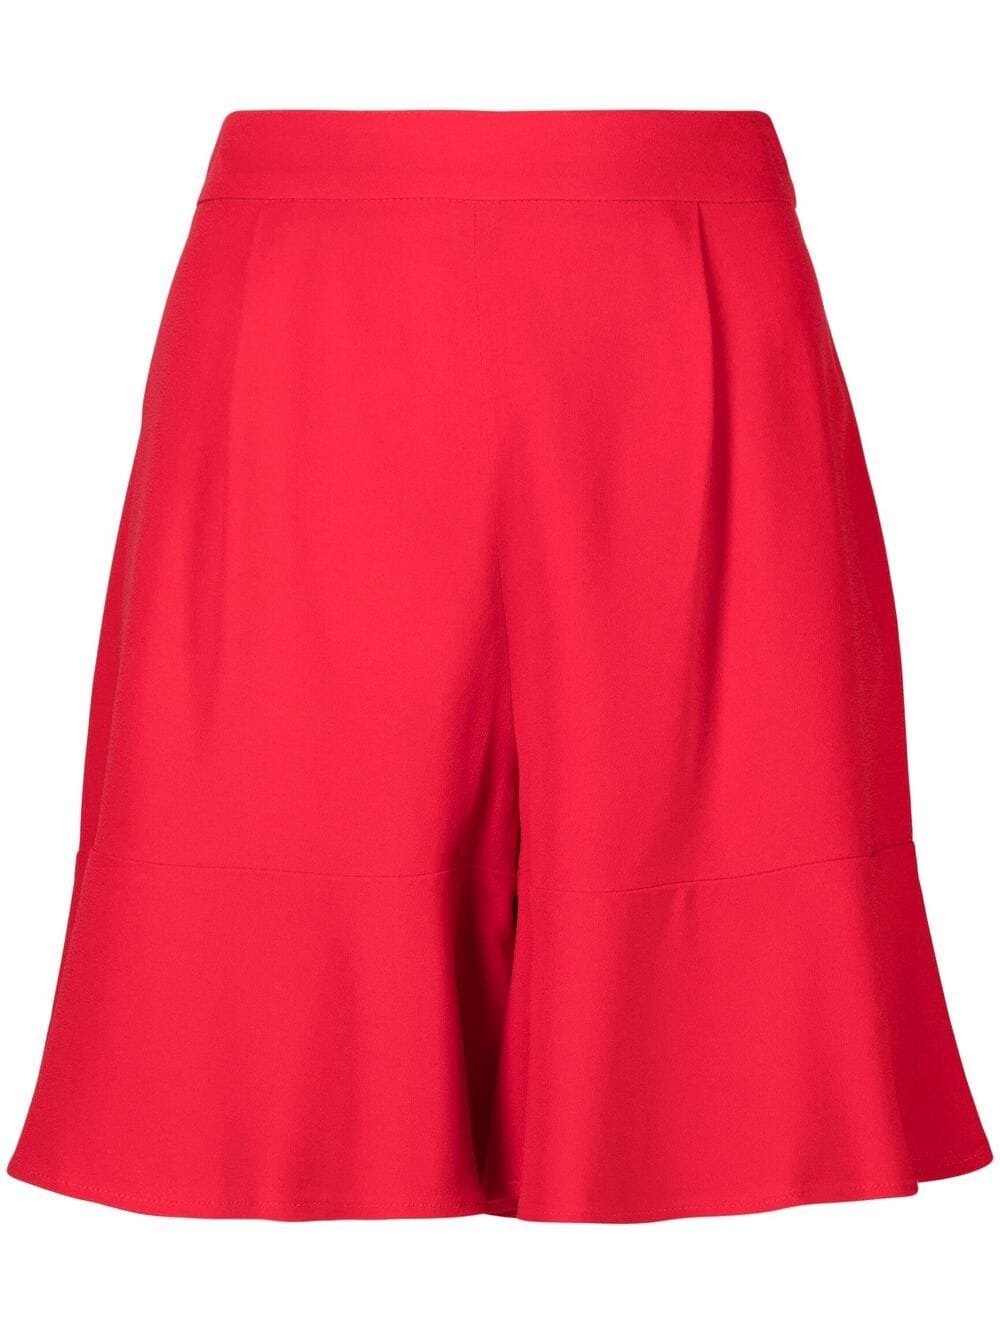 L'AUTRE CHOSE FLARED HIGH-WAISTED SHORTS